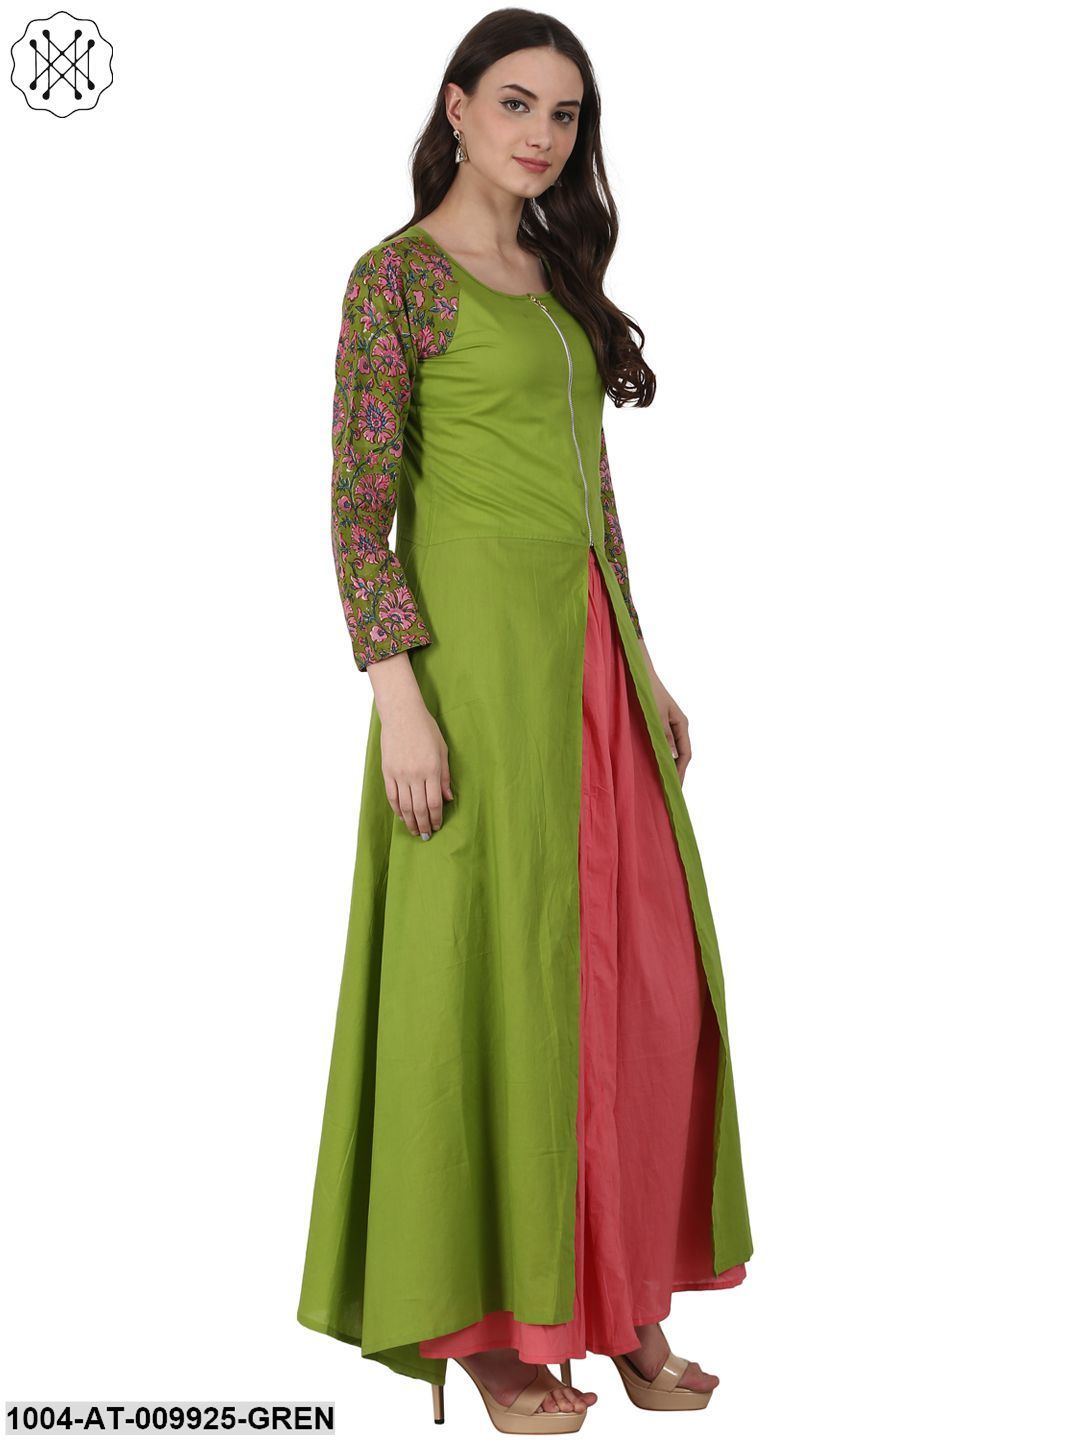 Green 3/4 Sleeve Cotton A-Line Kurta With Front Cut